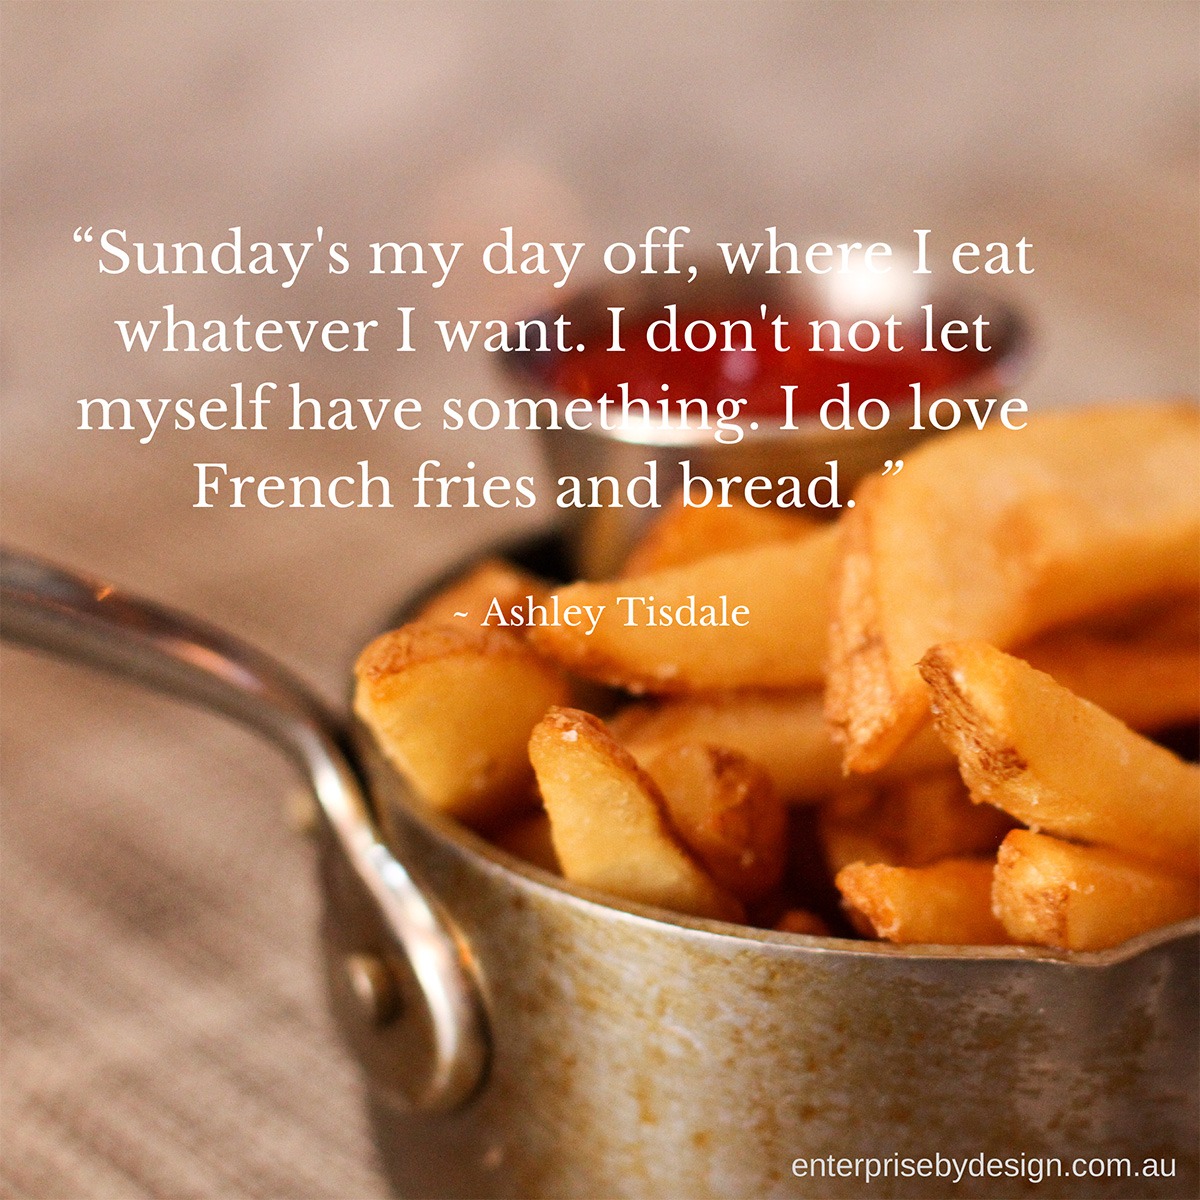 "Sunday's my day off, where I eat what ever I want. I don't not let myself have something. I do love French fries and bread." ~ Ashley Tisdale